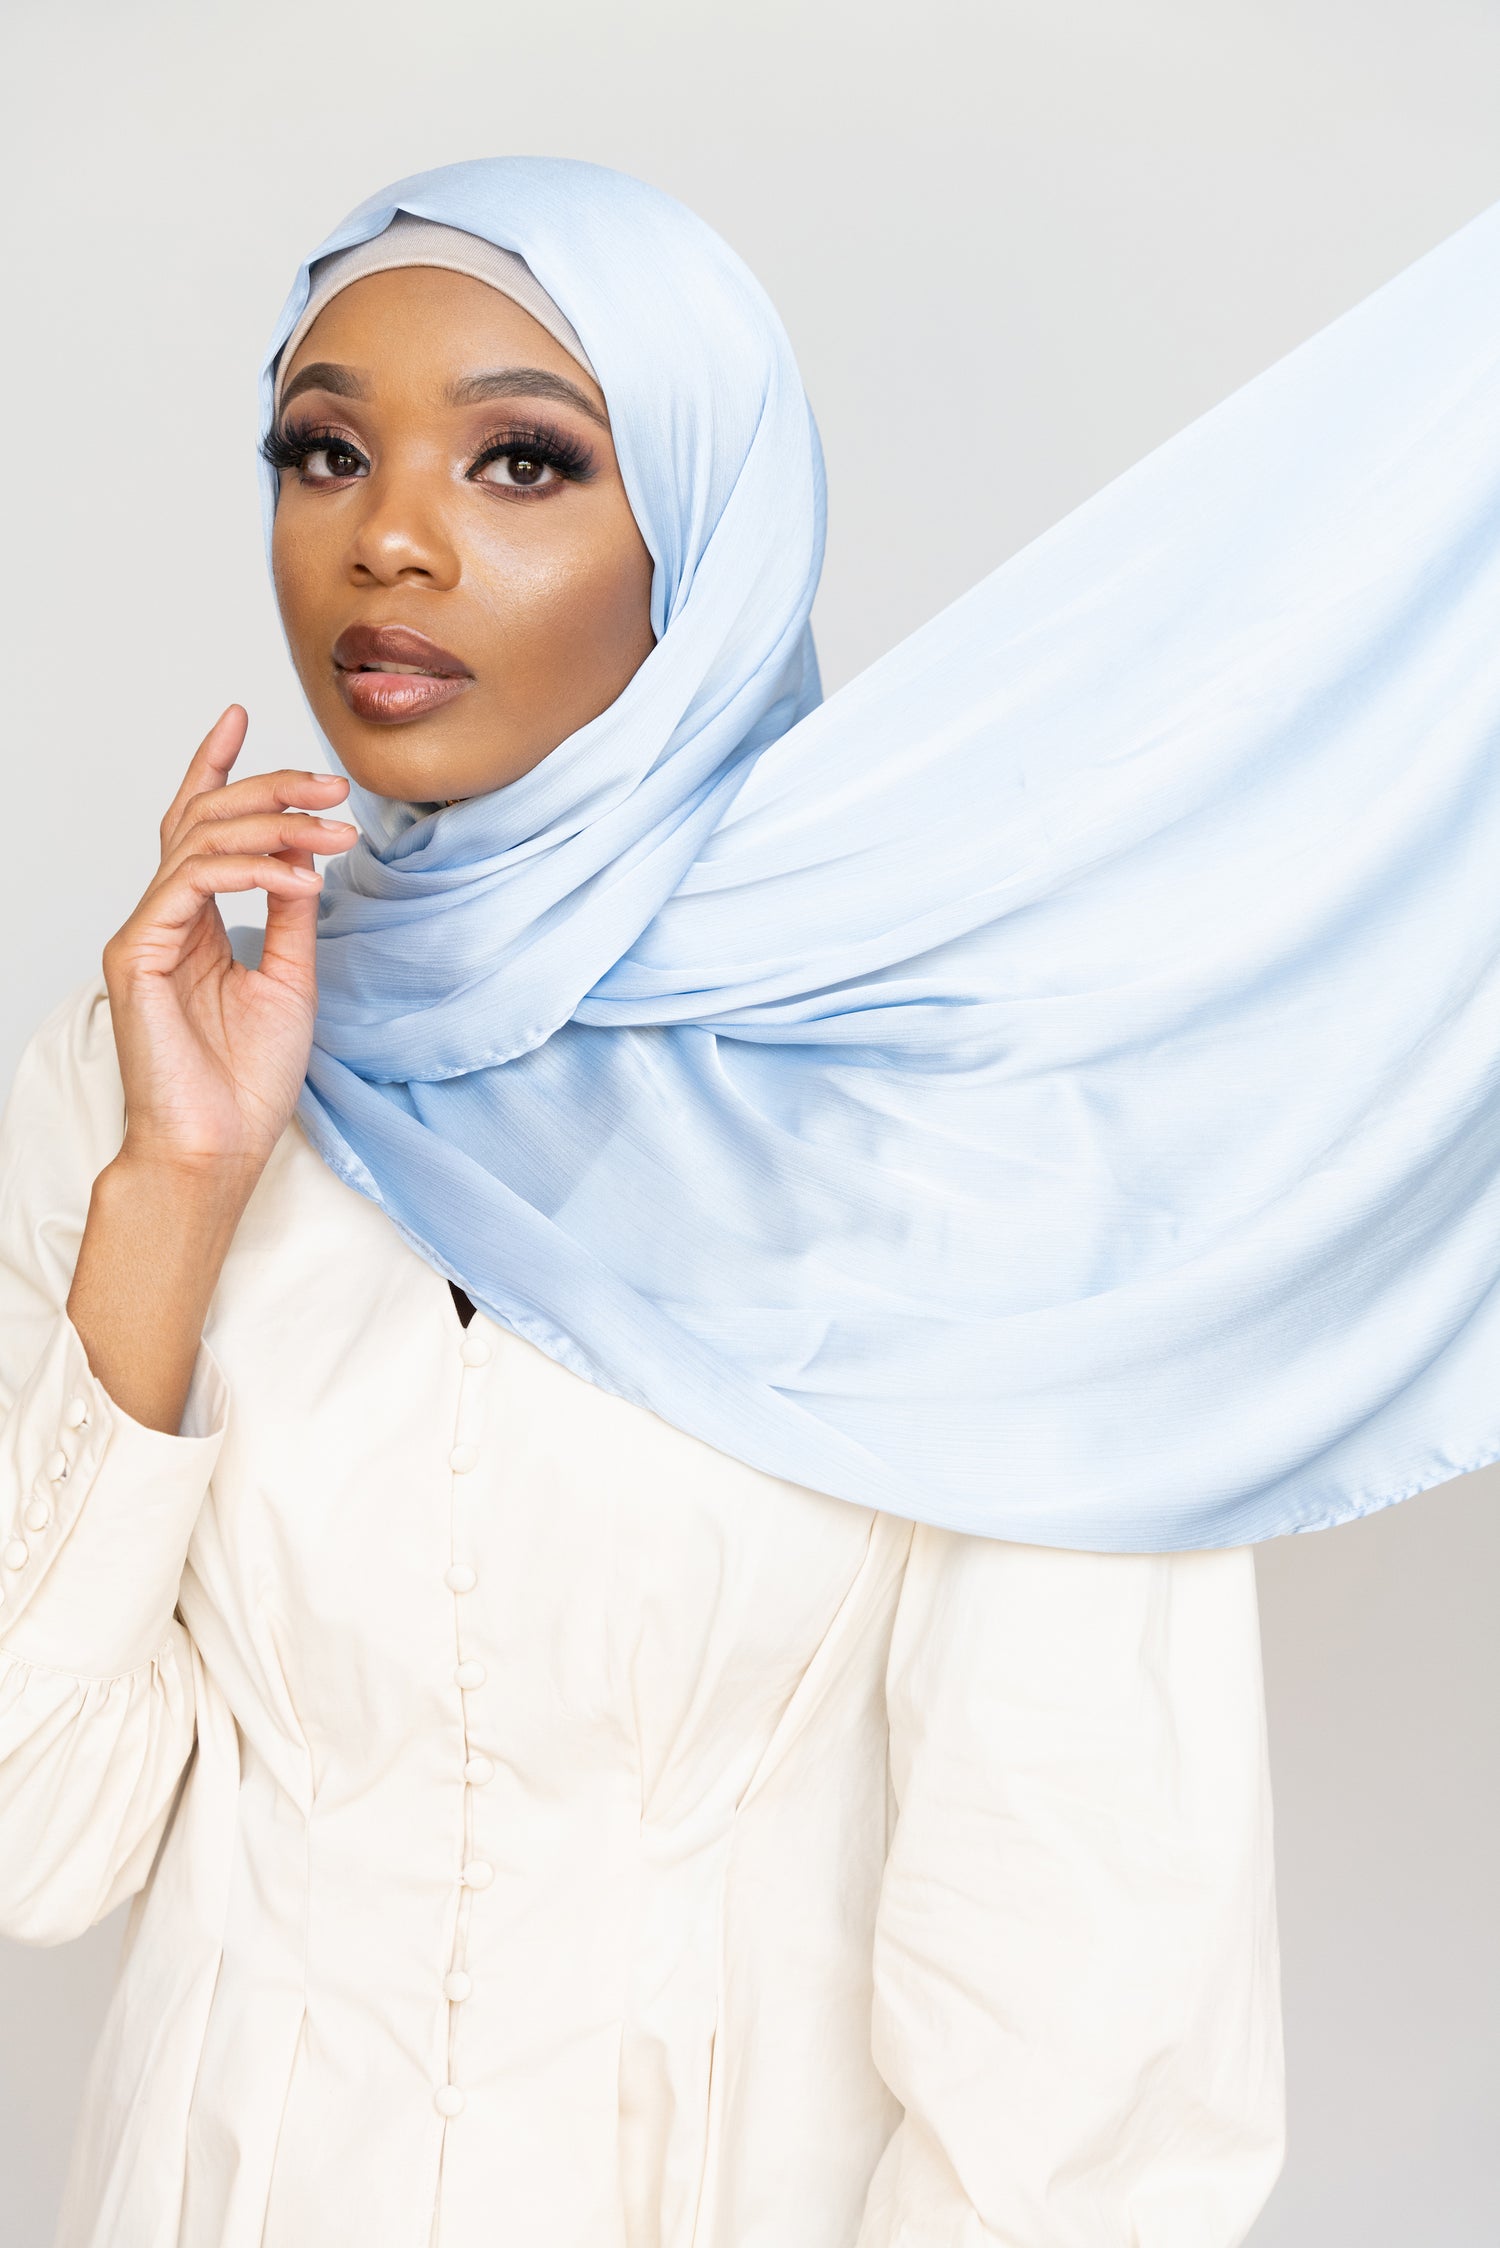 Shop Icy Blue Deluxe Satin Crepe Scarf on Sale | Niswa Fashion